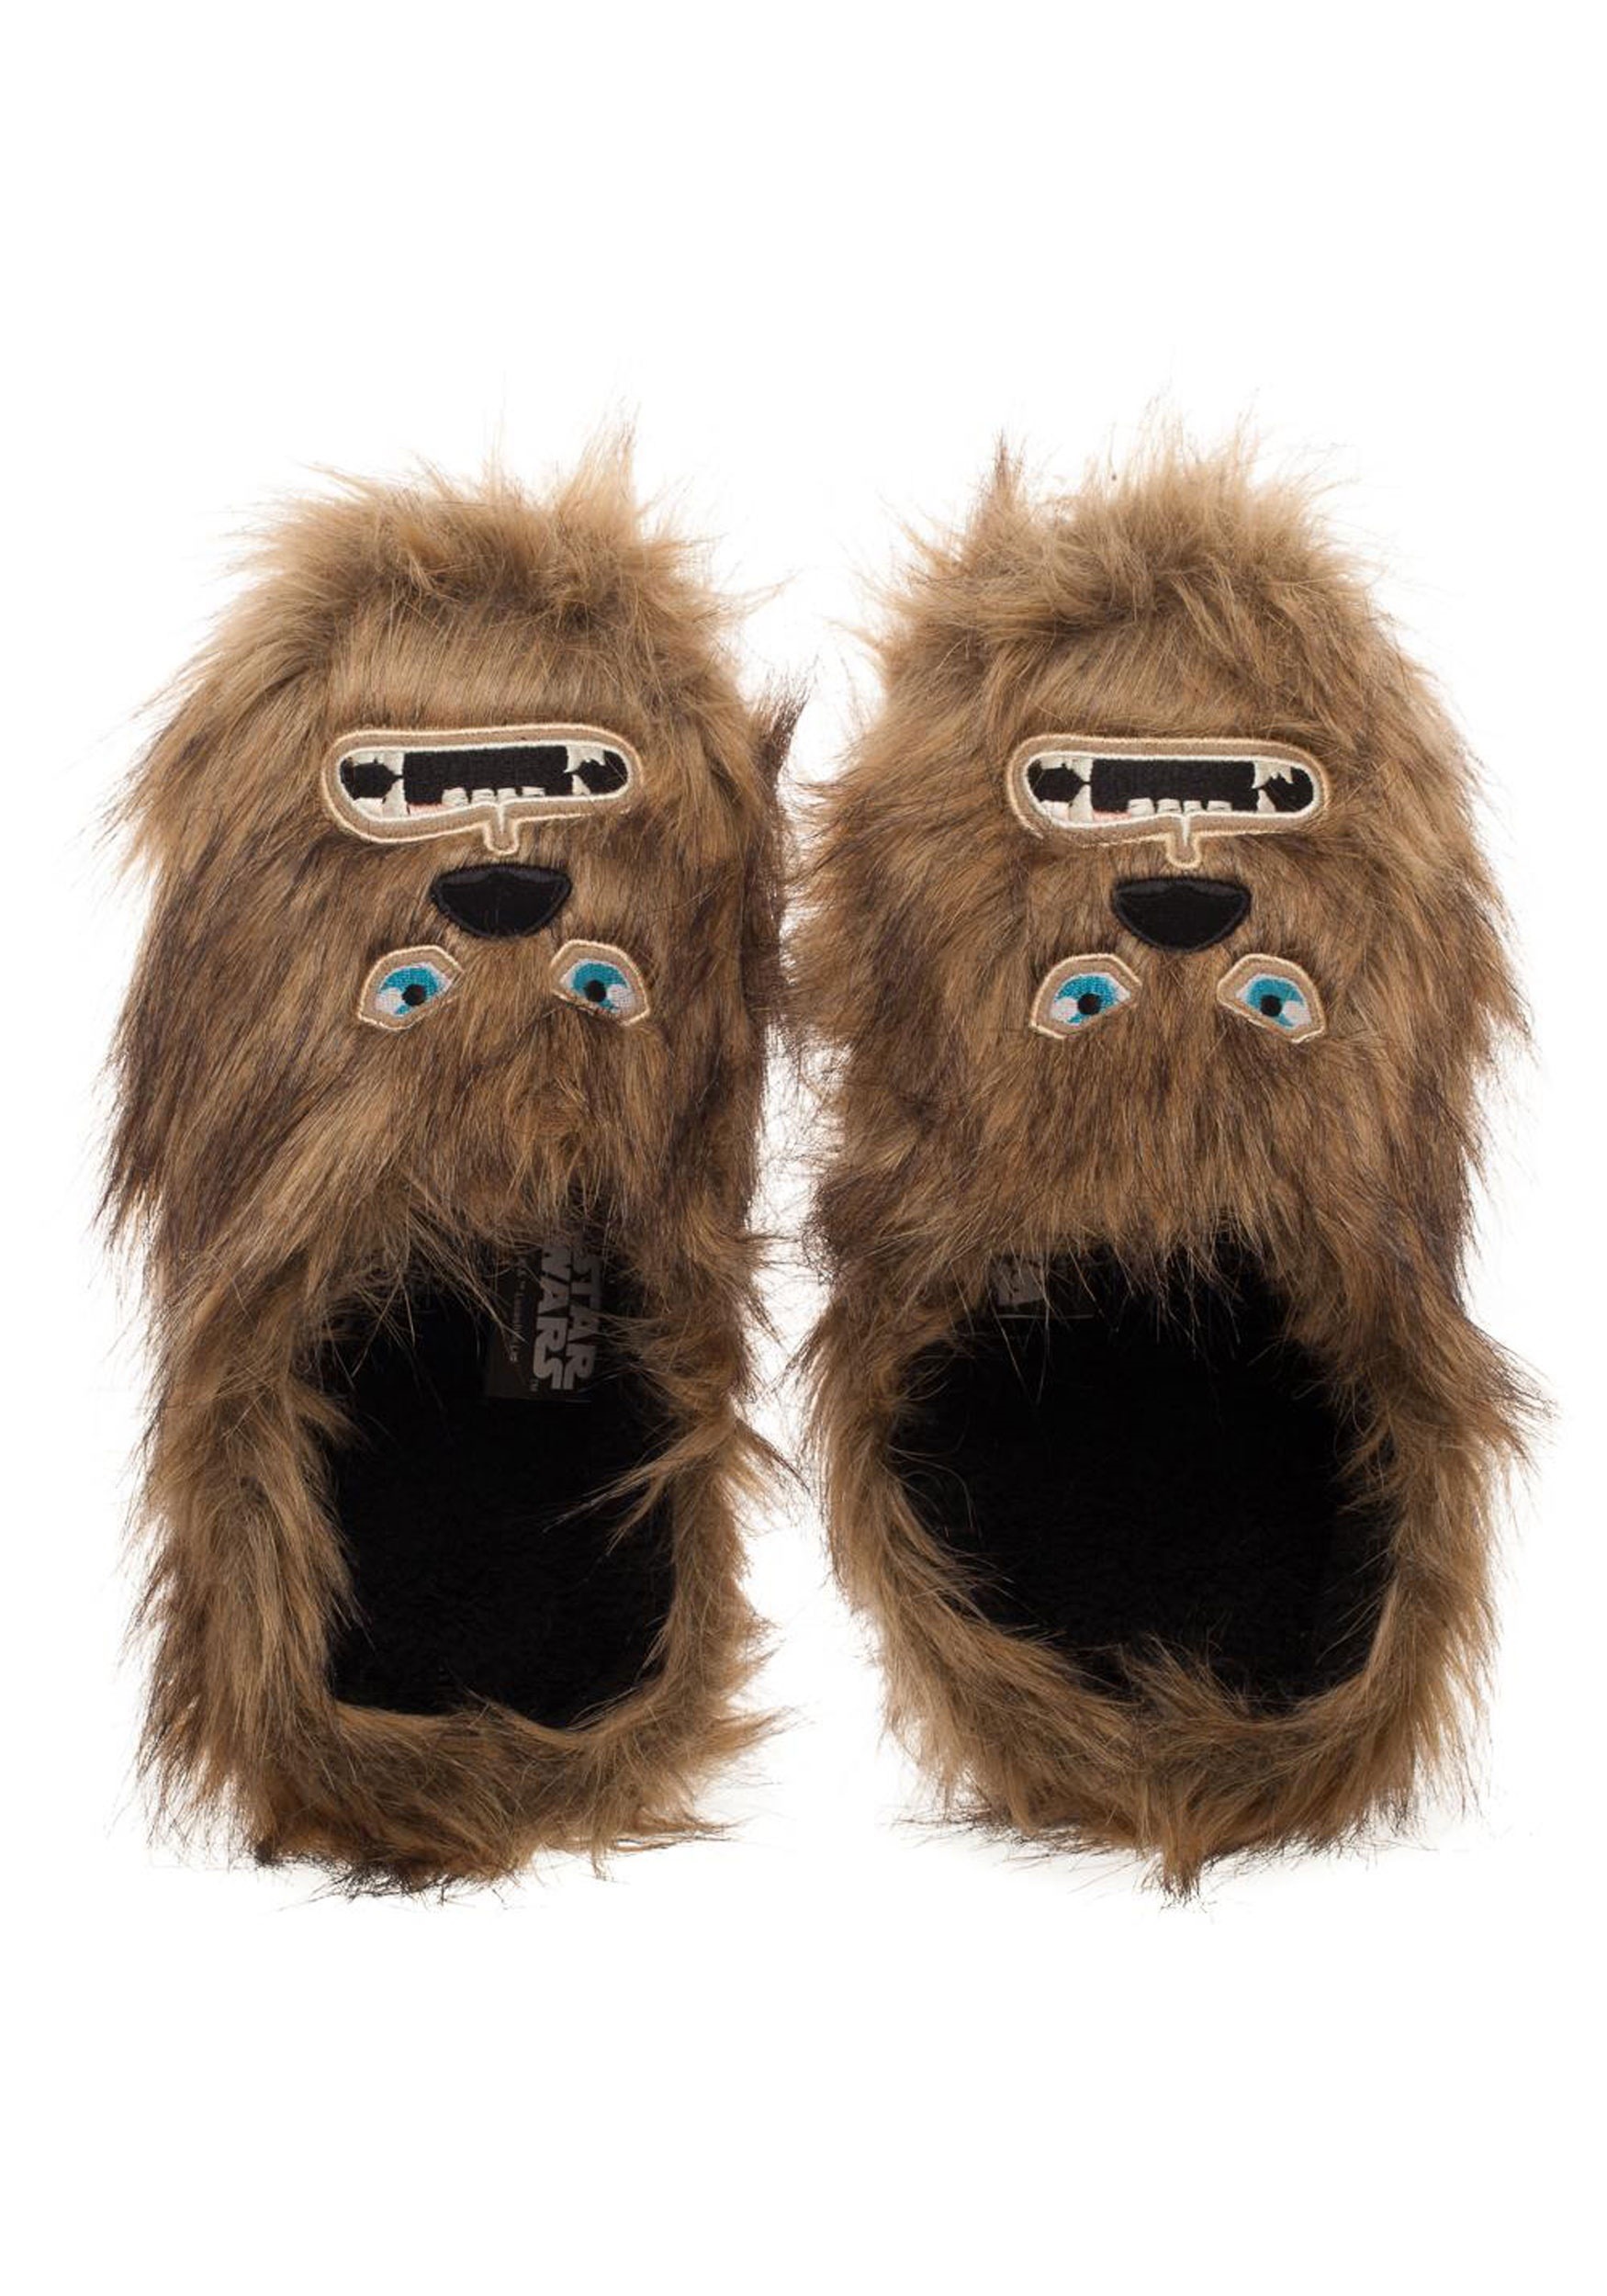 star wars slippers for adults